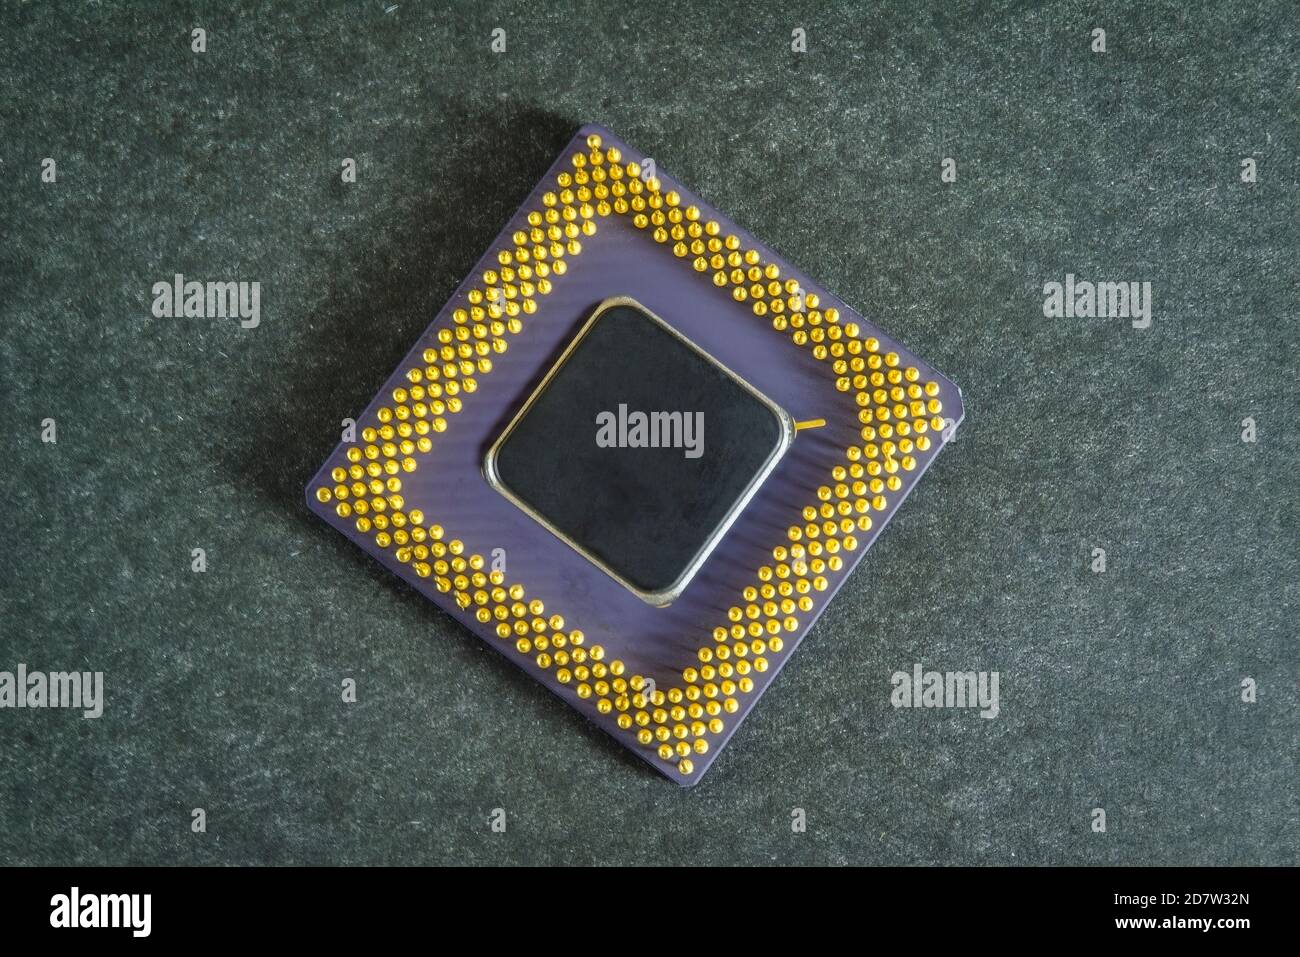 Main processor of desktop computer close-up isolated on a dark grey background. Stock Photo